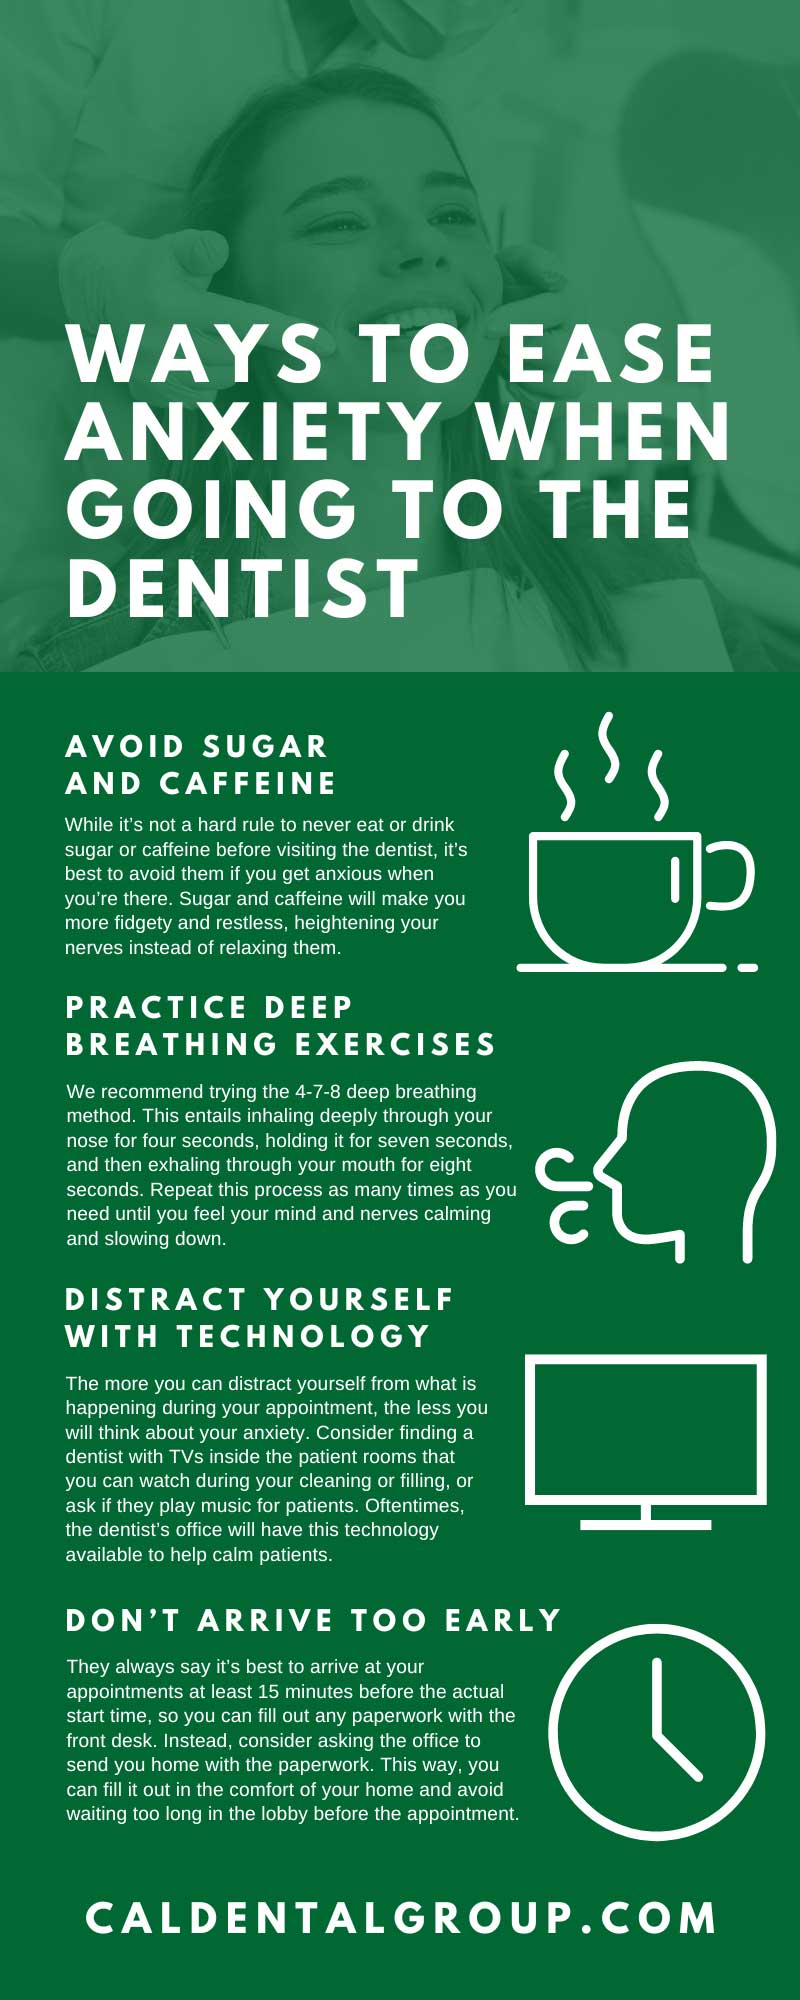 8 Ways To Ease Anxiety When Going to the Dentist